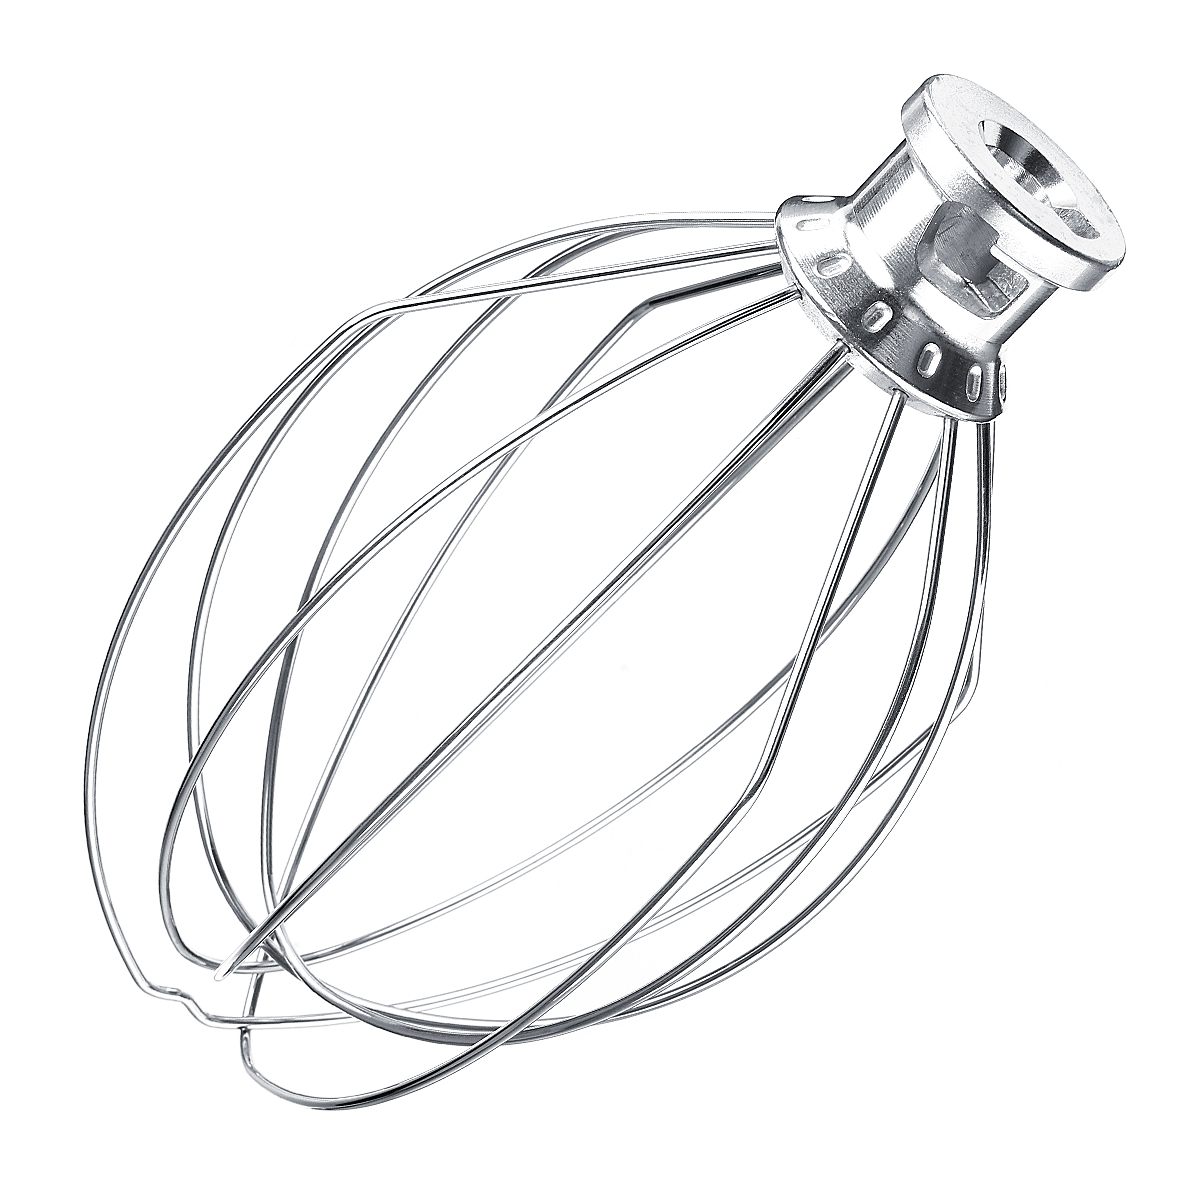 6-Wire-Whip-Whisk-Beater-Mixer-Stainless-Steel-Silver-For-KitchenAid-K5AWW-KSM90-1731695-6